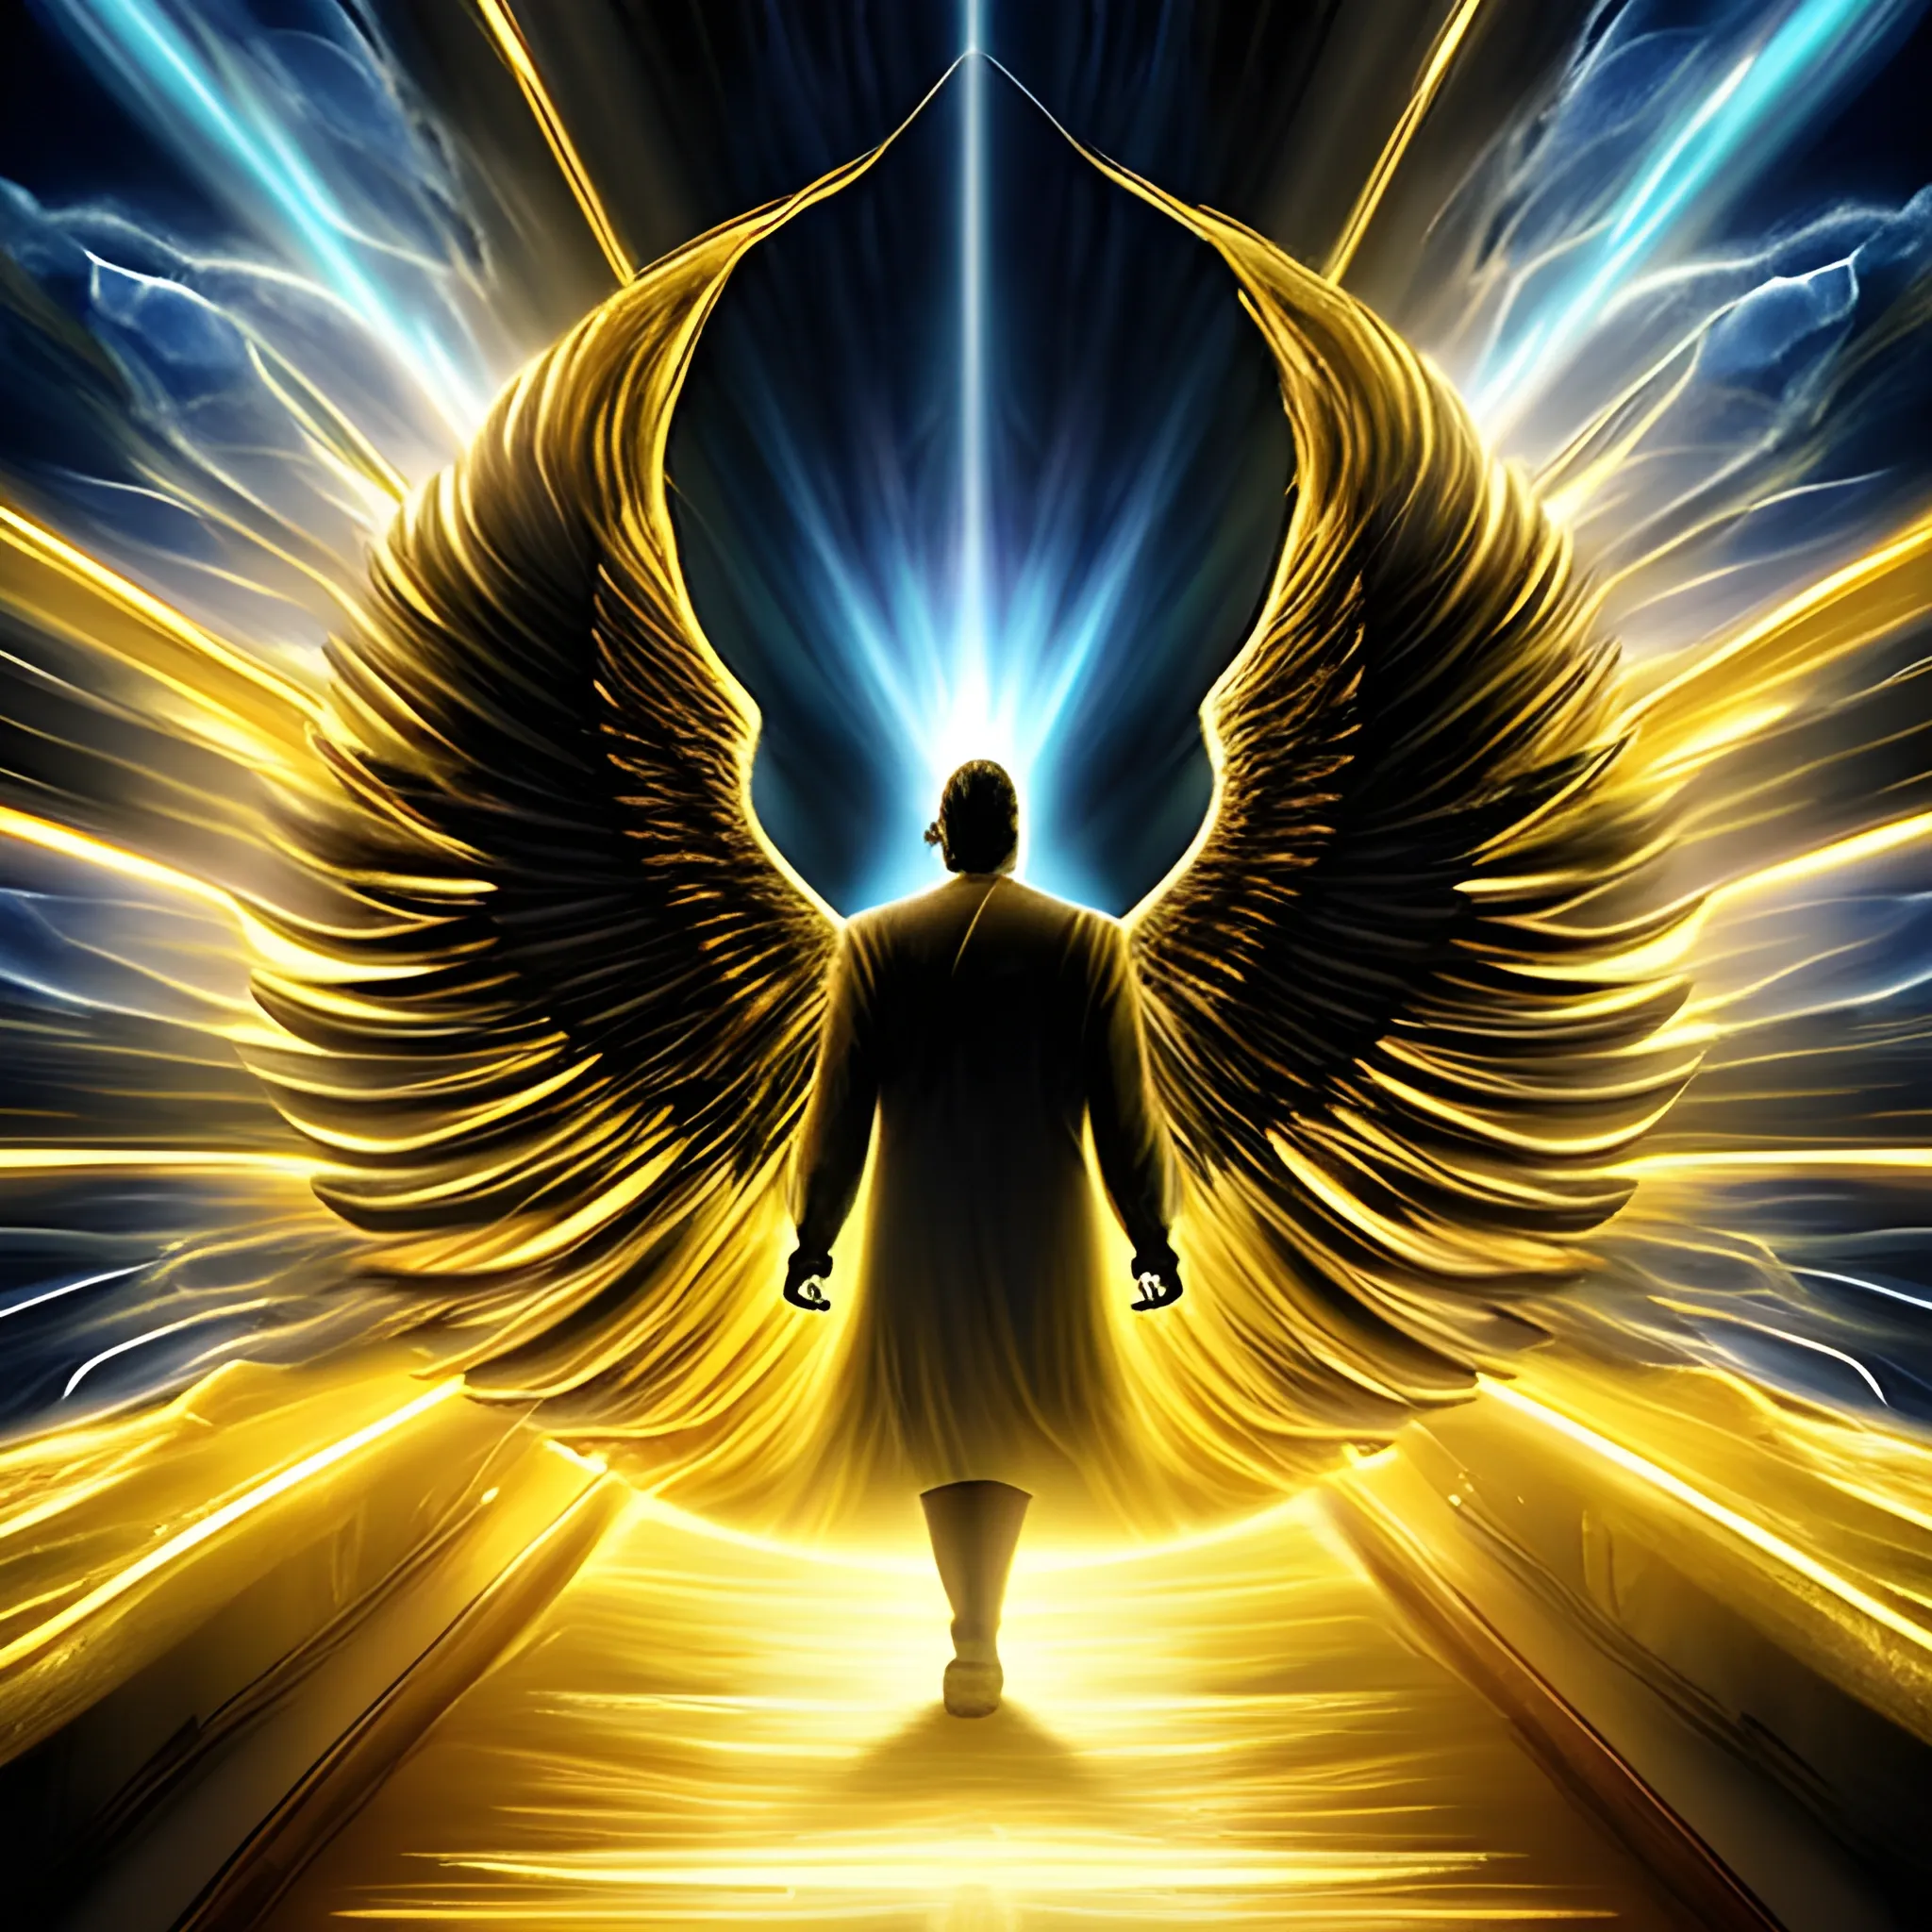 the angel of death entering the gates of heaven with his back turned. The sky with many clouds and with a flash of light, and the golden doors, Trippy